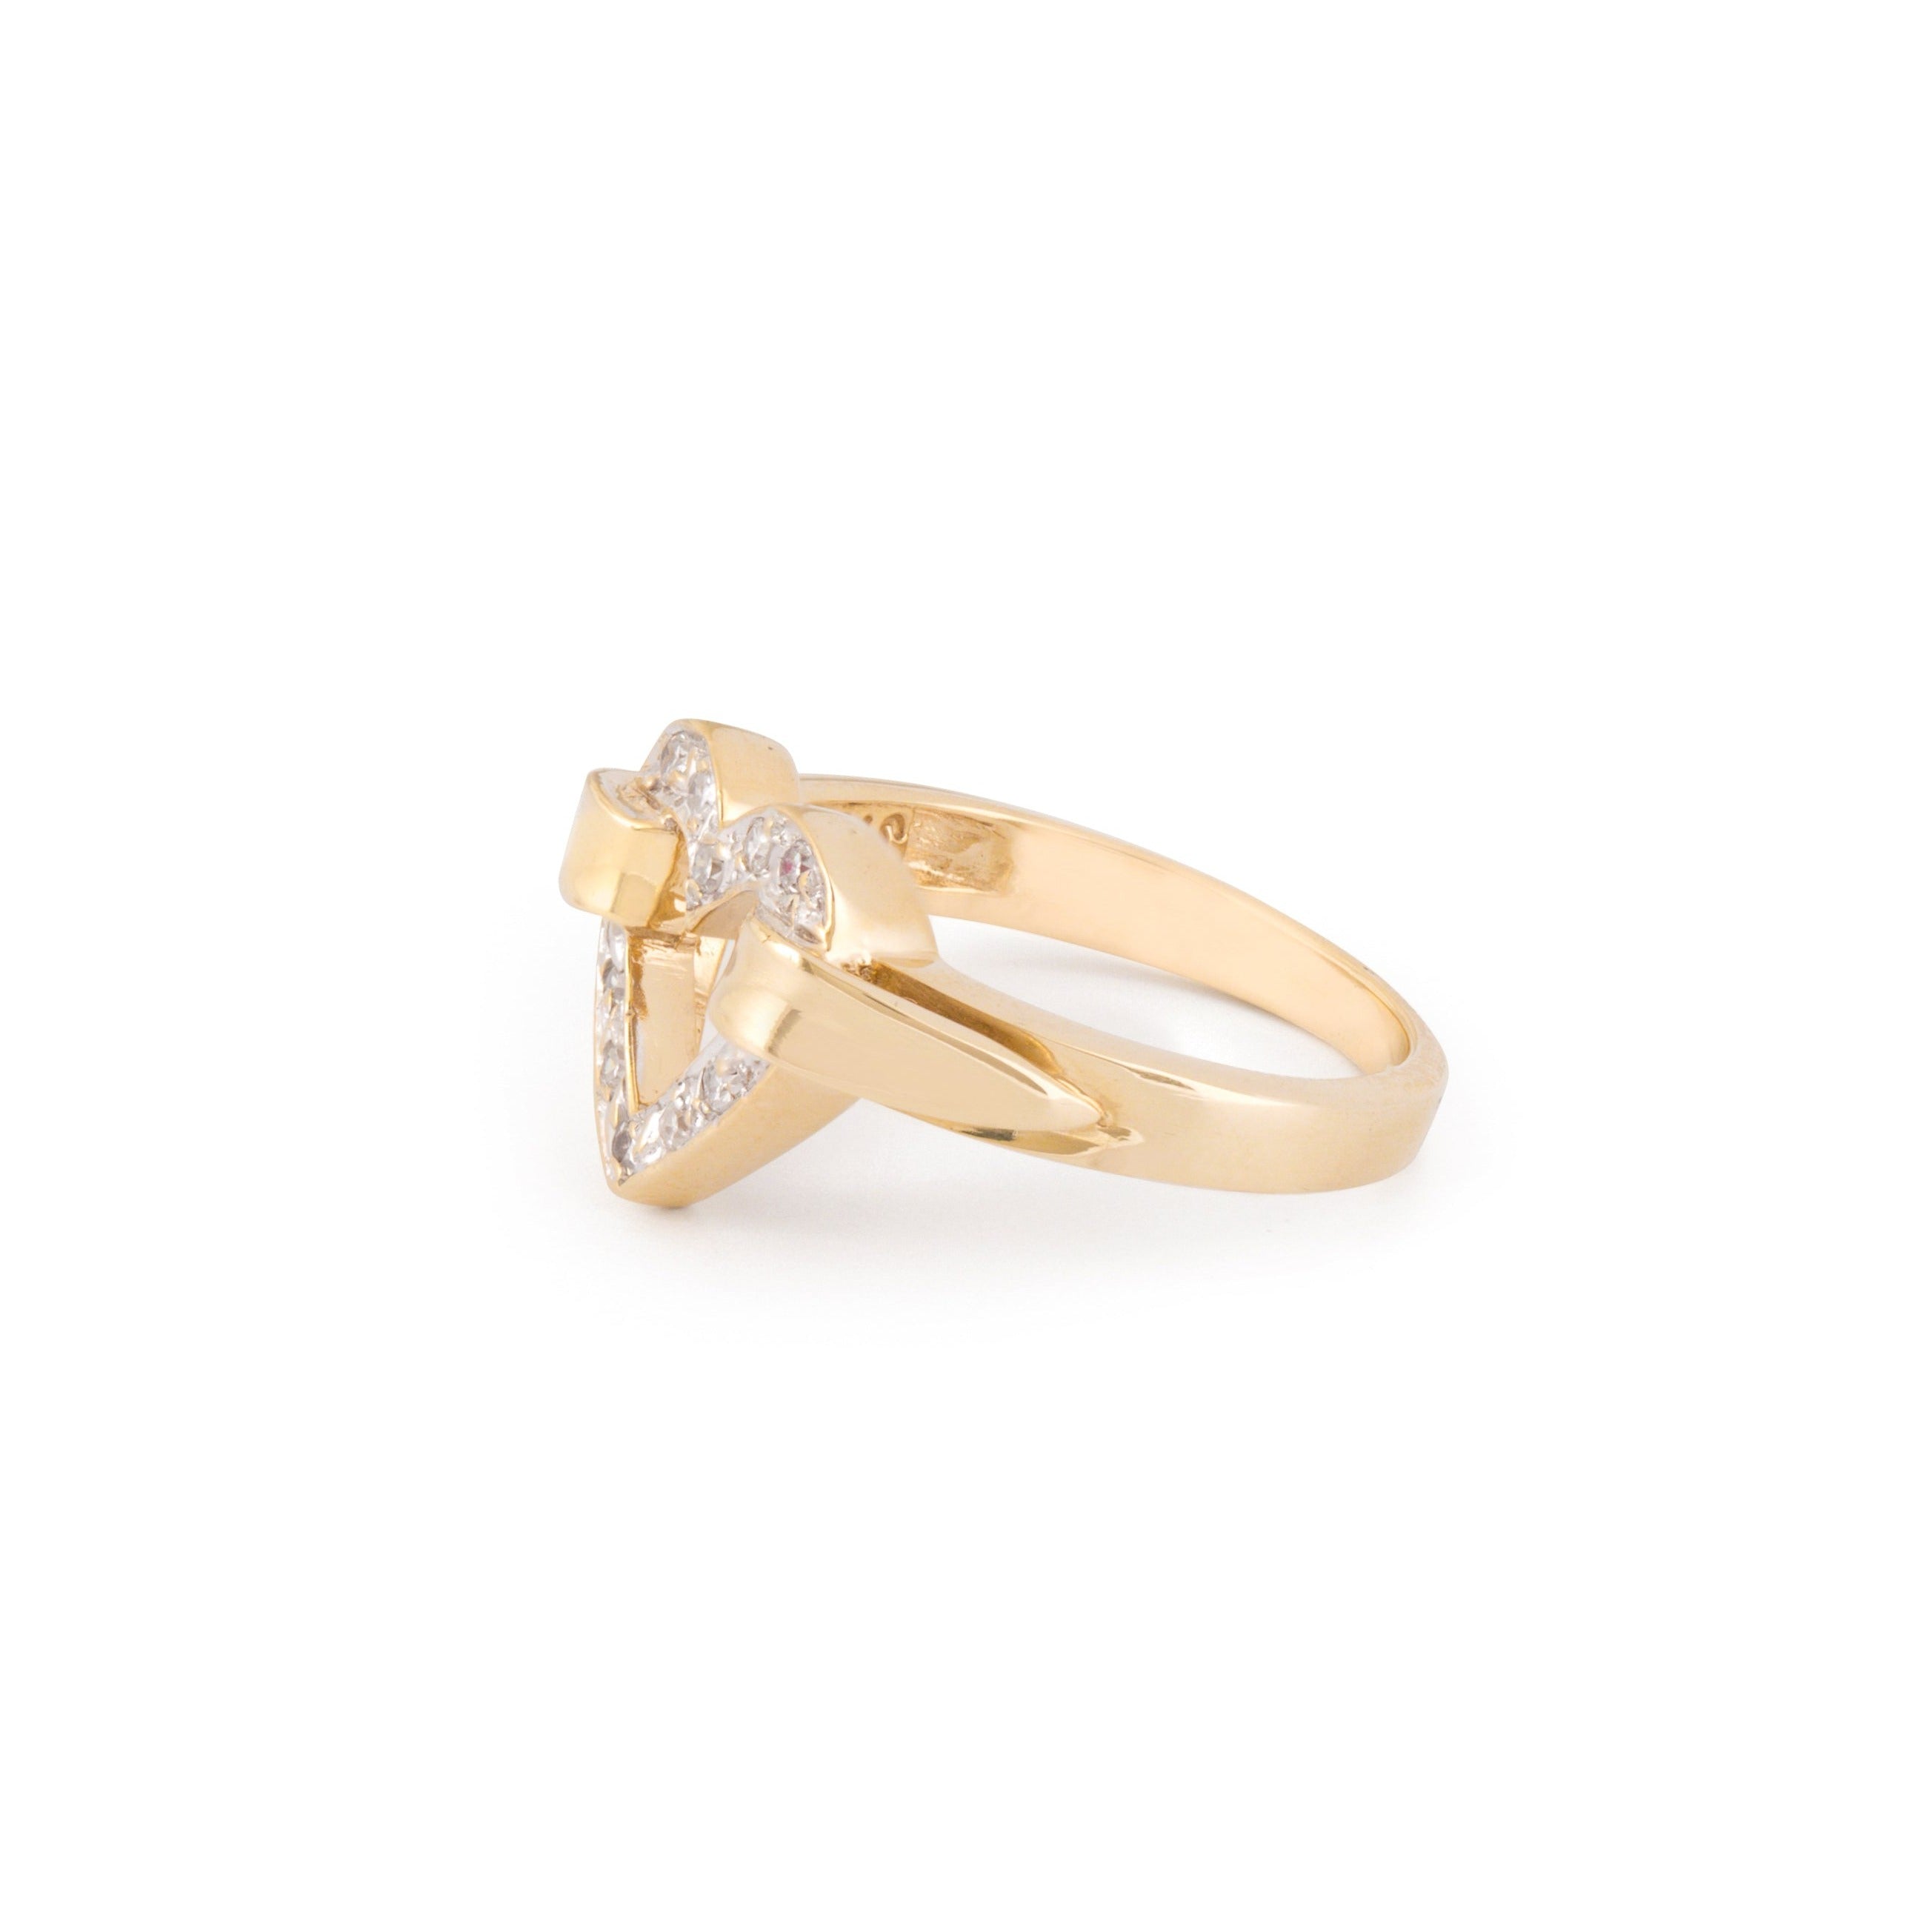 Diamond Open Heart and 14k Gold Ring